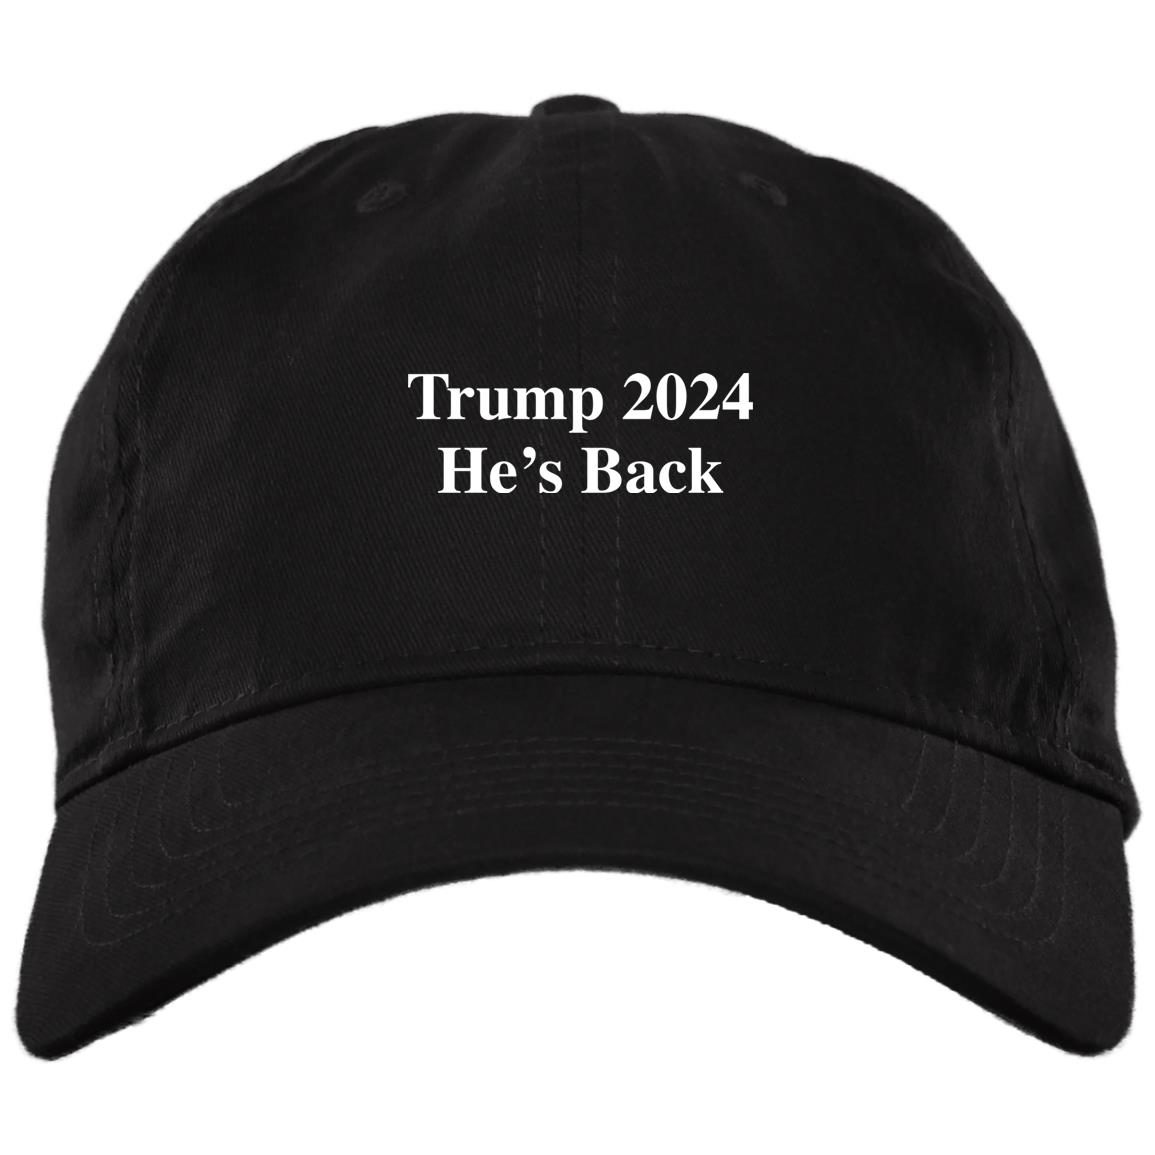 Tr*mp 2024 he is back hat cap